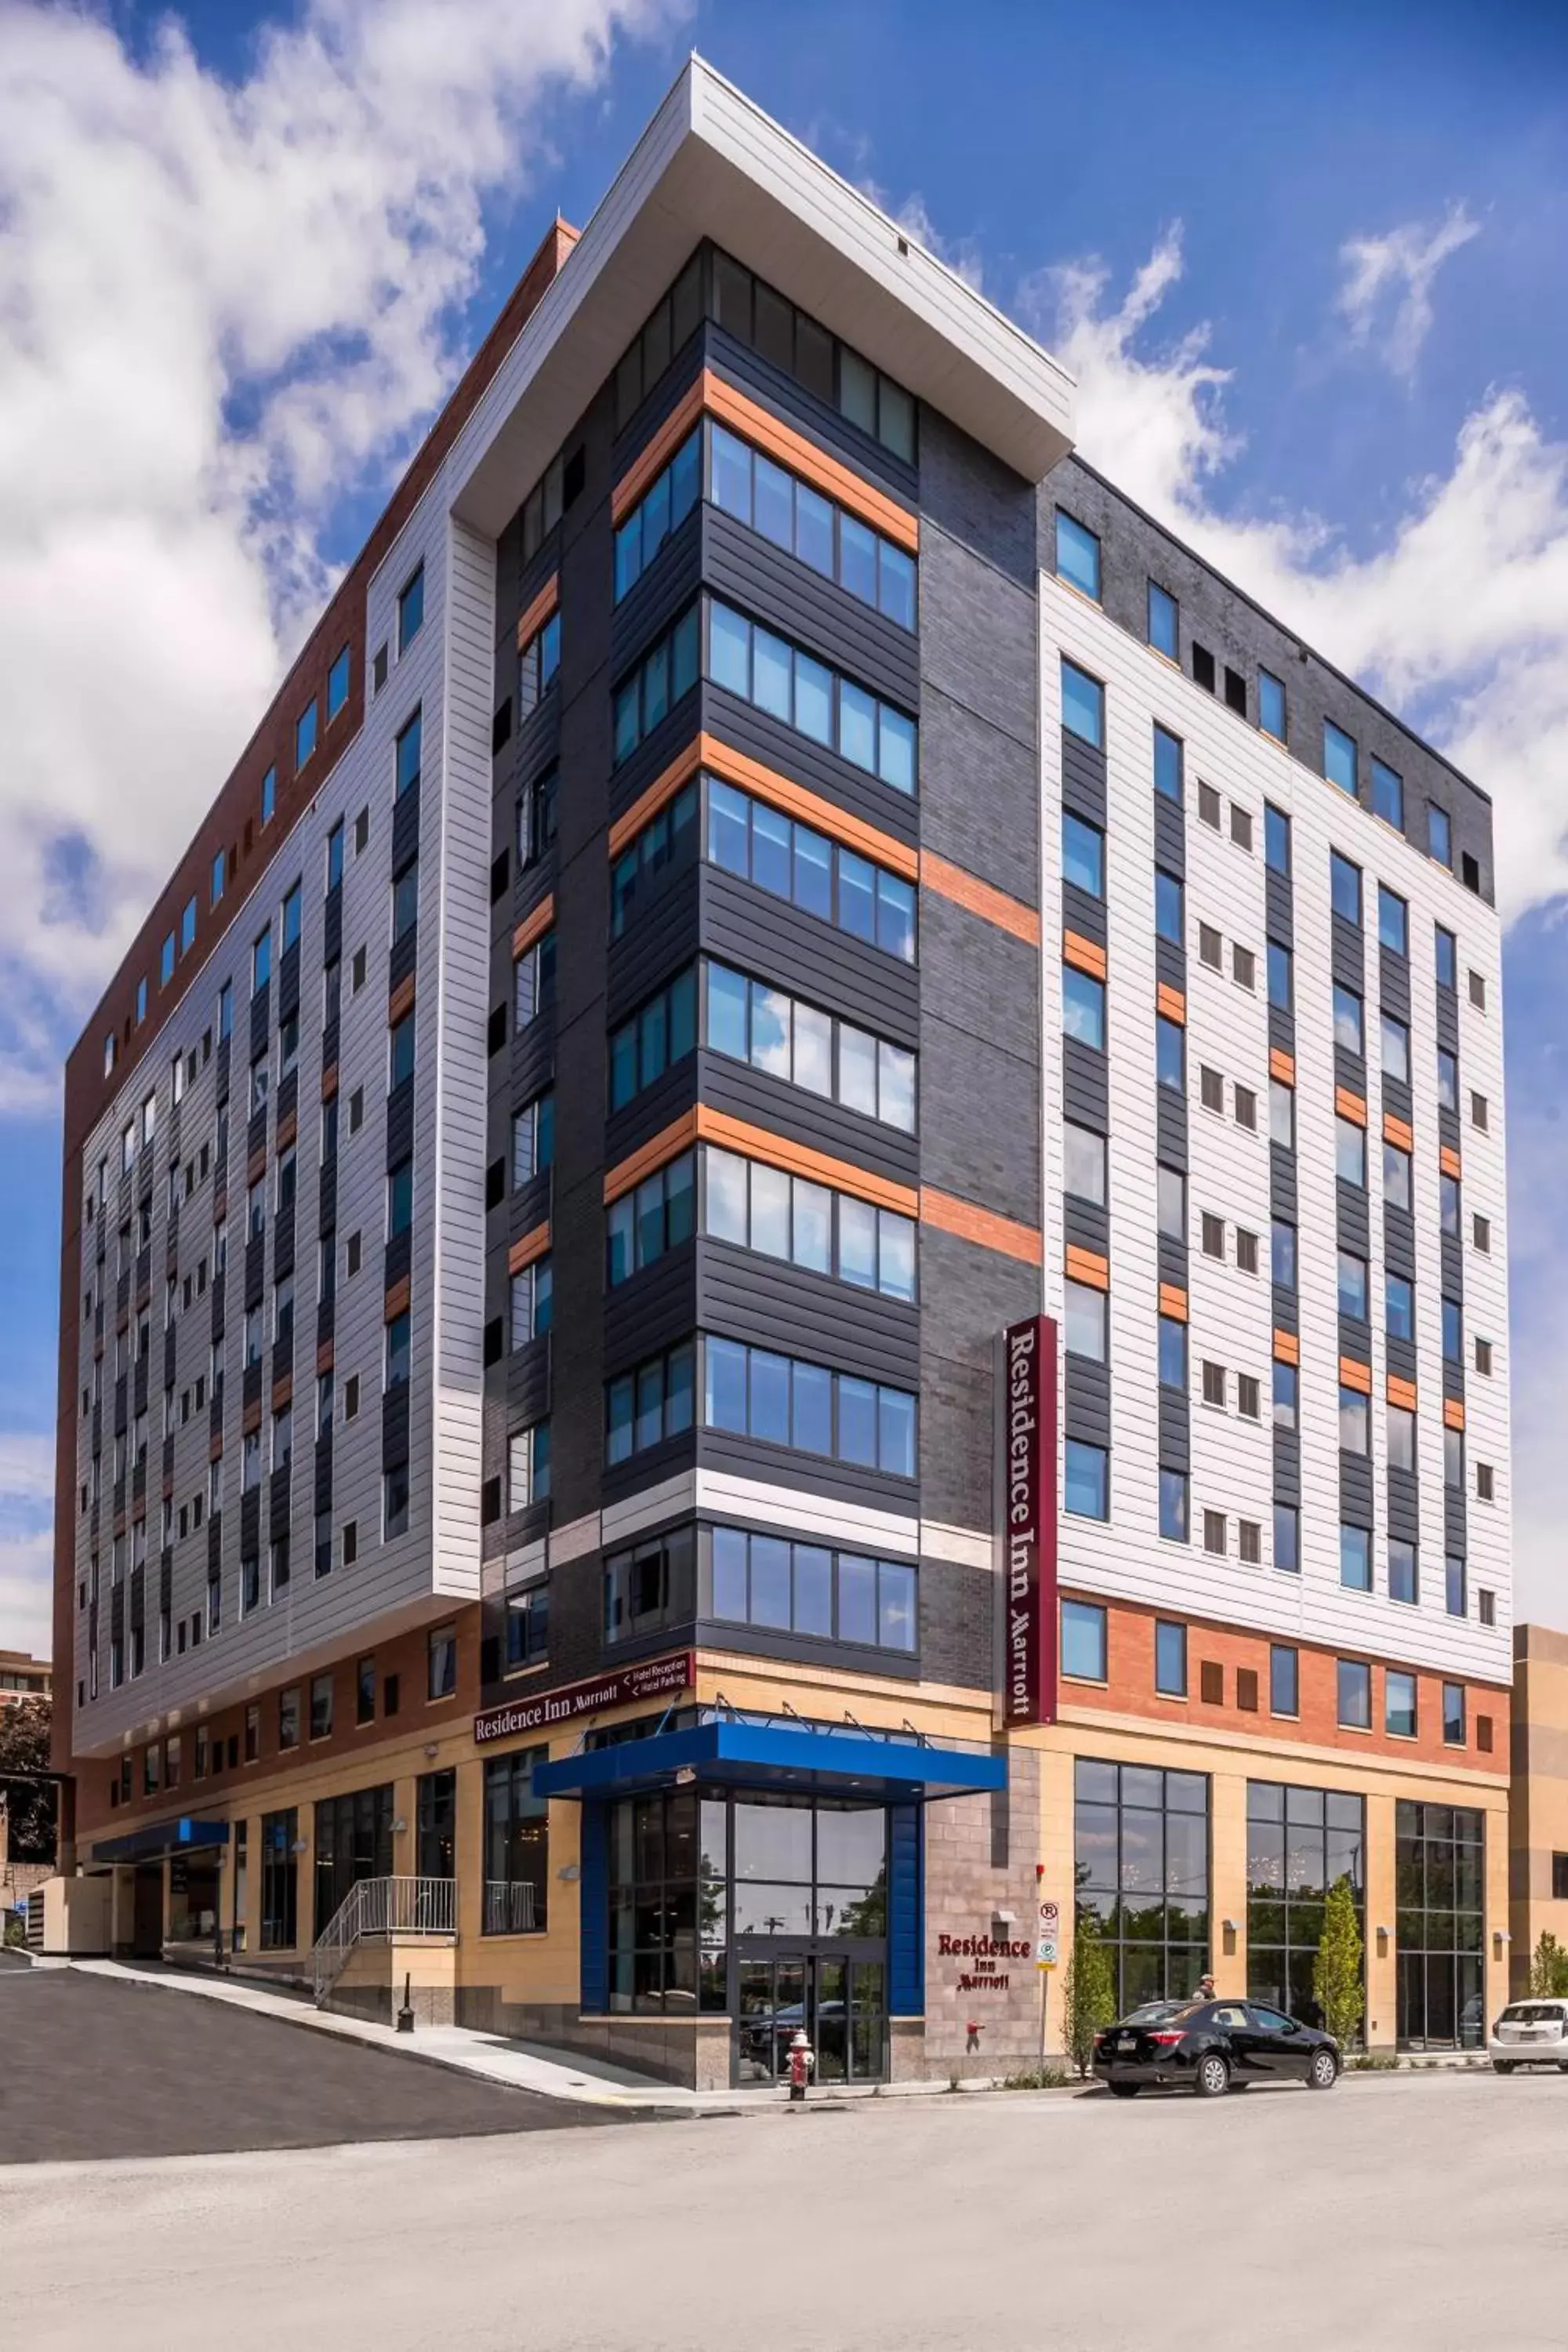 Property Building in Residence Inn by Marriott Pittsburgh Oakland/University Place